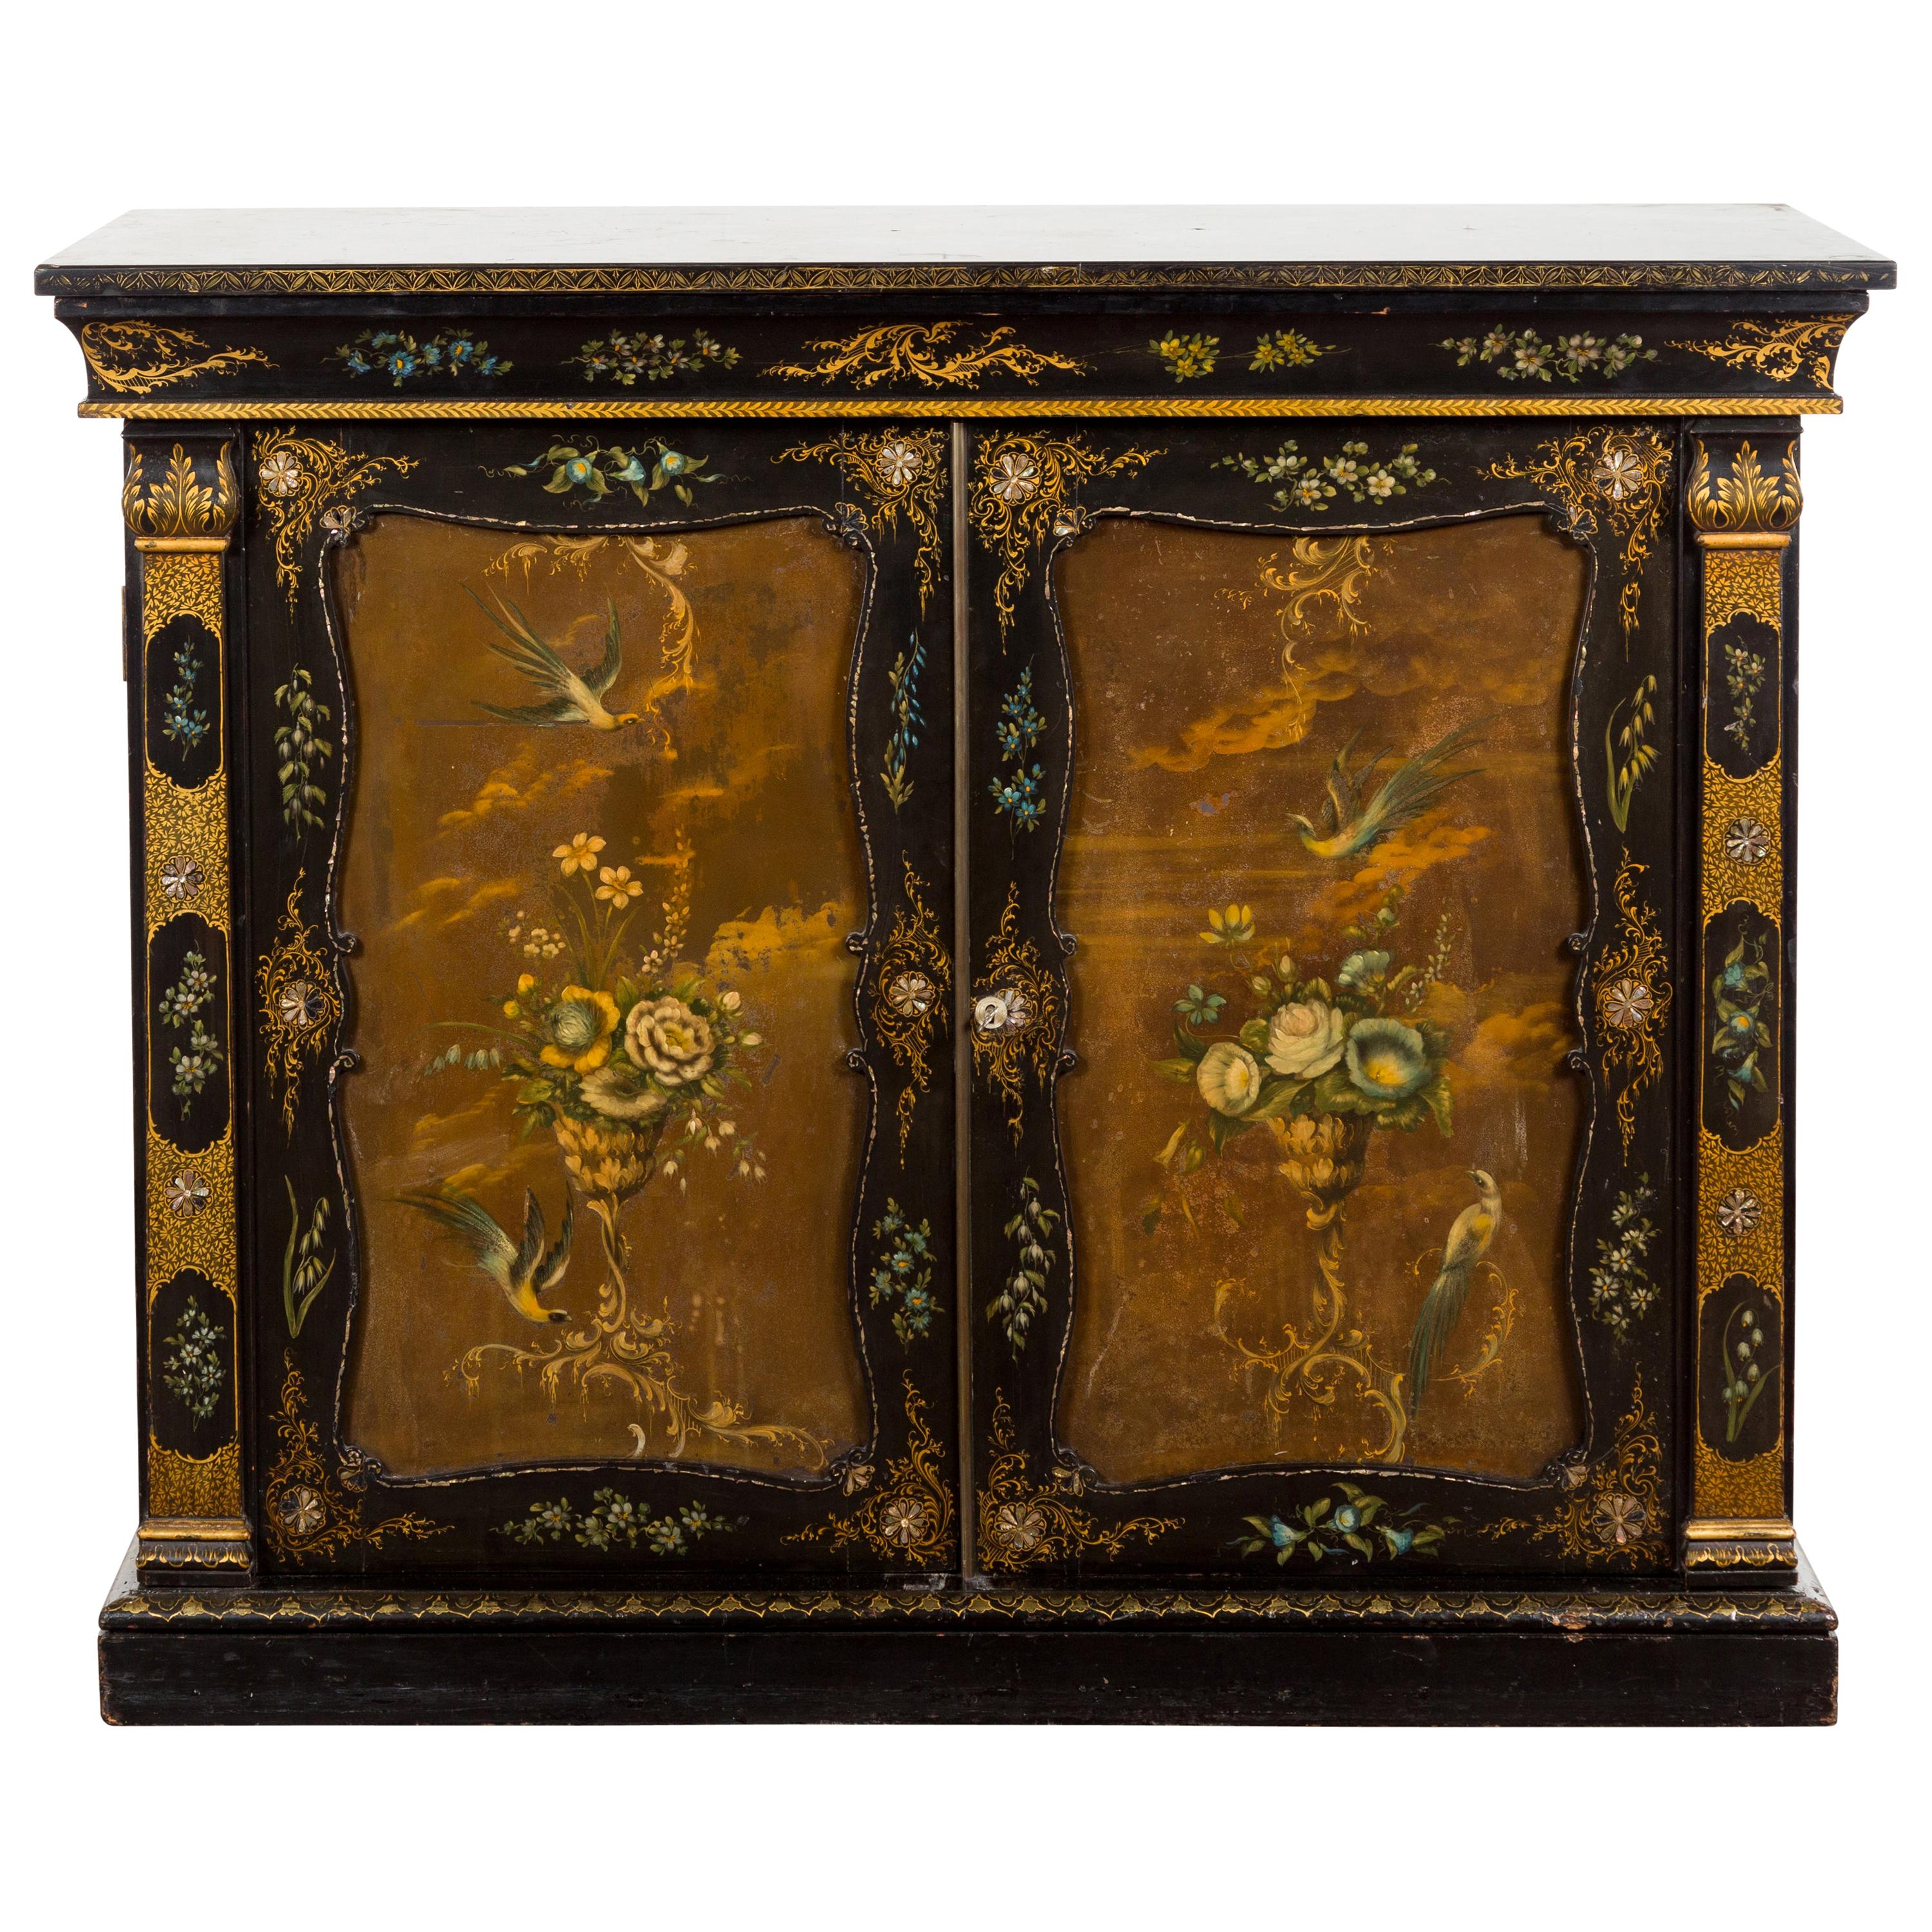 English Black and Gold 19th Century Cabinet with Painted Floral Marble Top